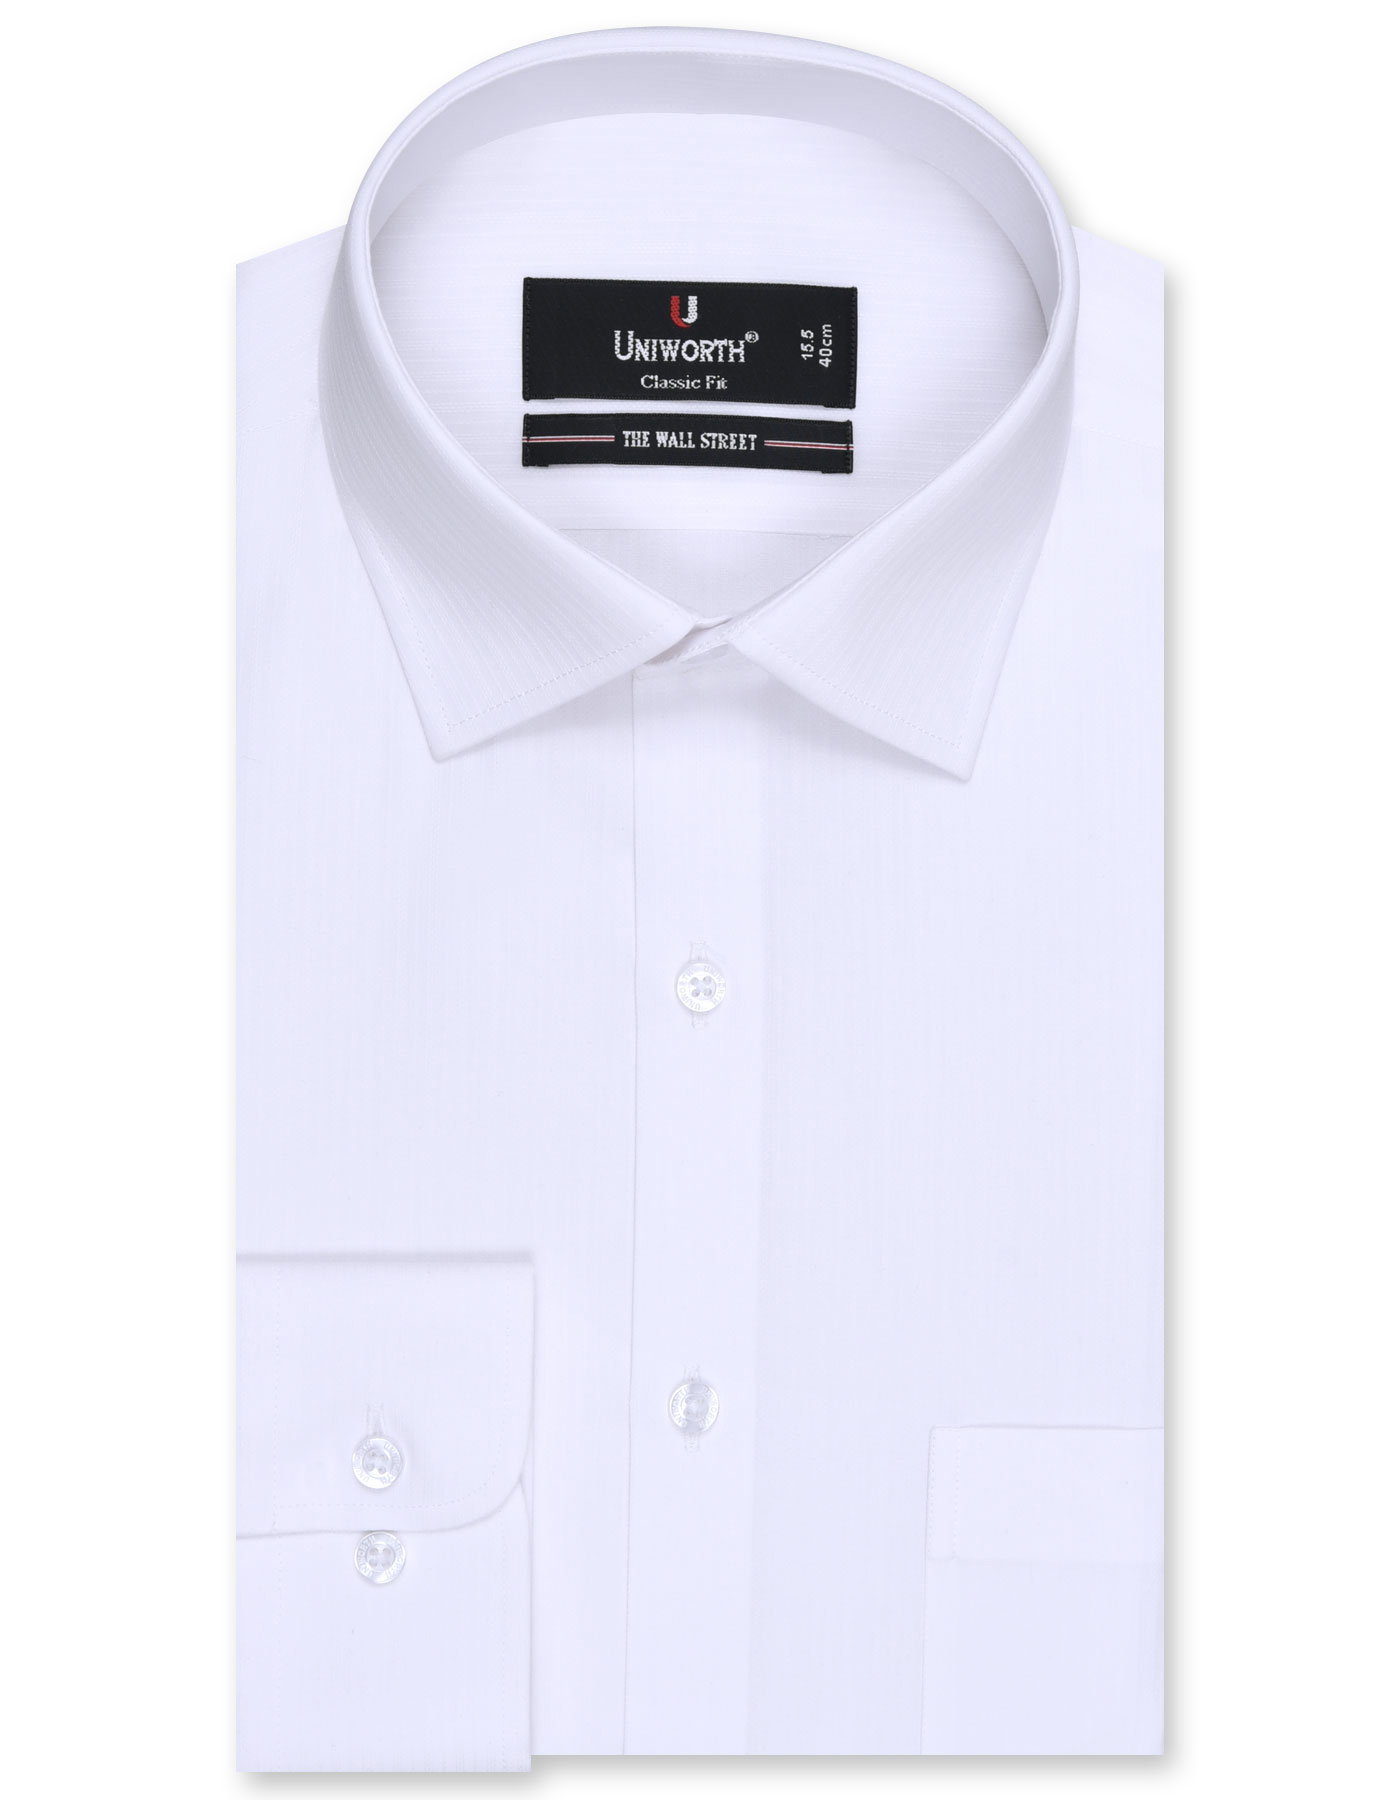 Plain Shirts For Mens Online Shopping in Pakistan at Uniworth Shop